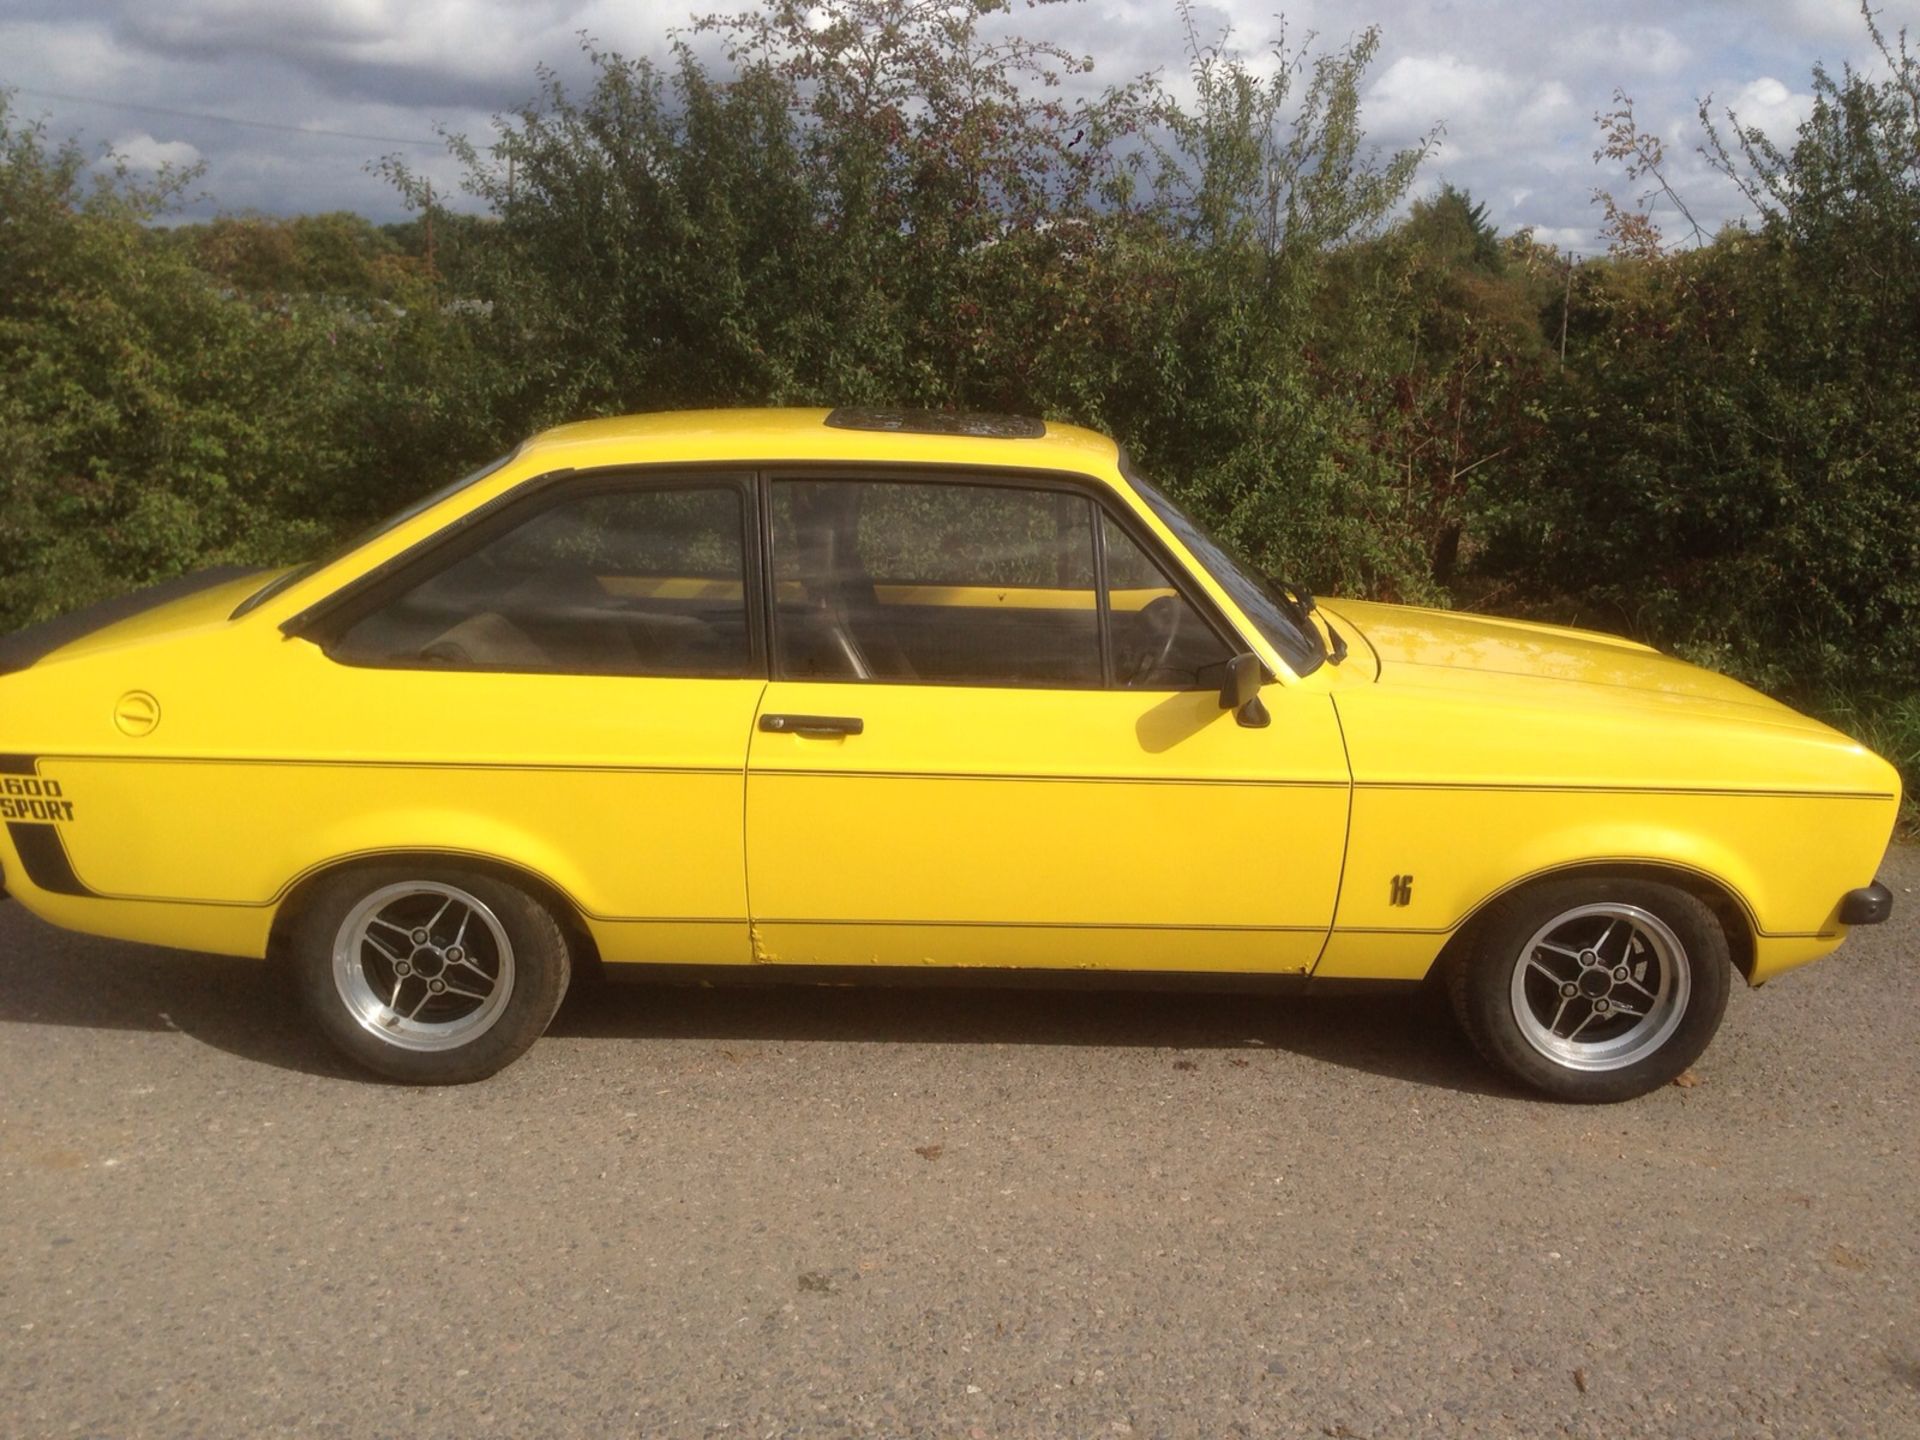 1979/T Ford Escort mk2 1600 Sport - in Signal yellow -  UK car  (545 miles) since rebuild - Image 5 of 54